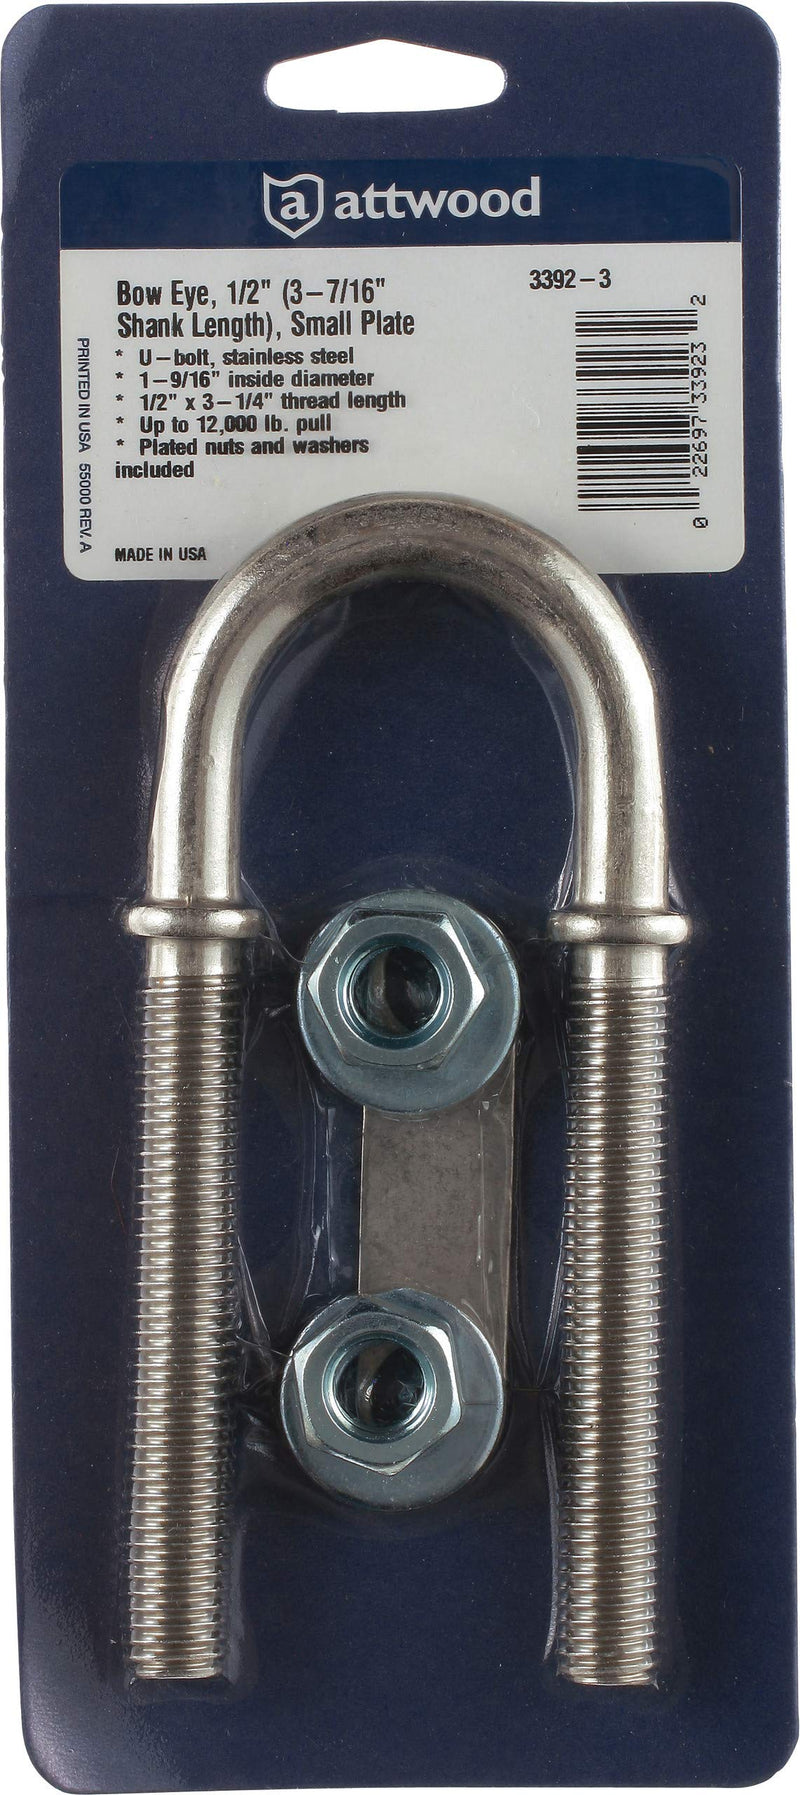  [AUSTRALIA] - Attwood 3392-3 Stainless Steel Bow Eye 7/16-Inch U-Bolt with Plated Nuts and Washers